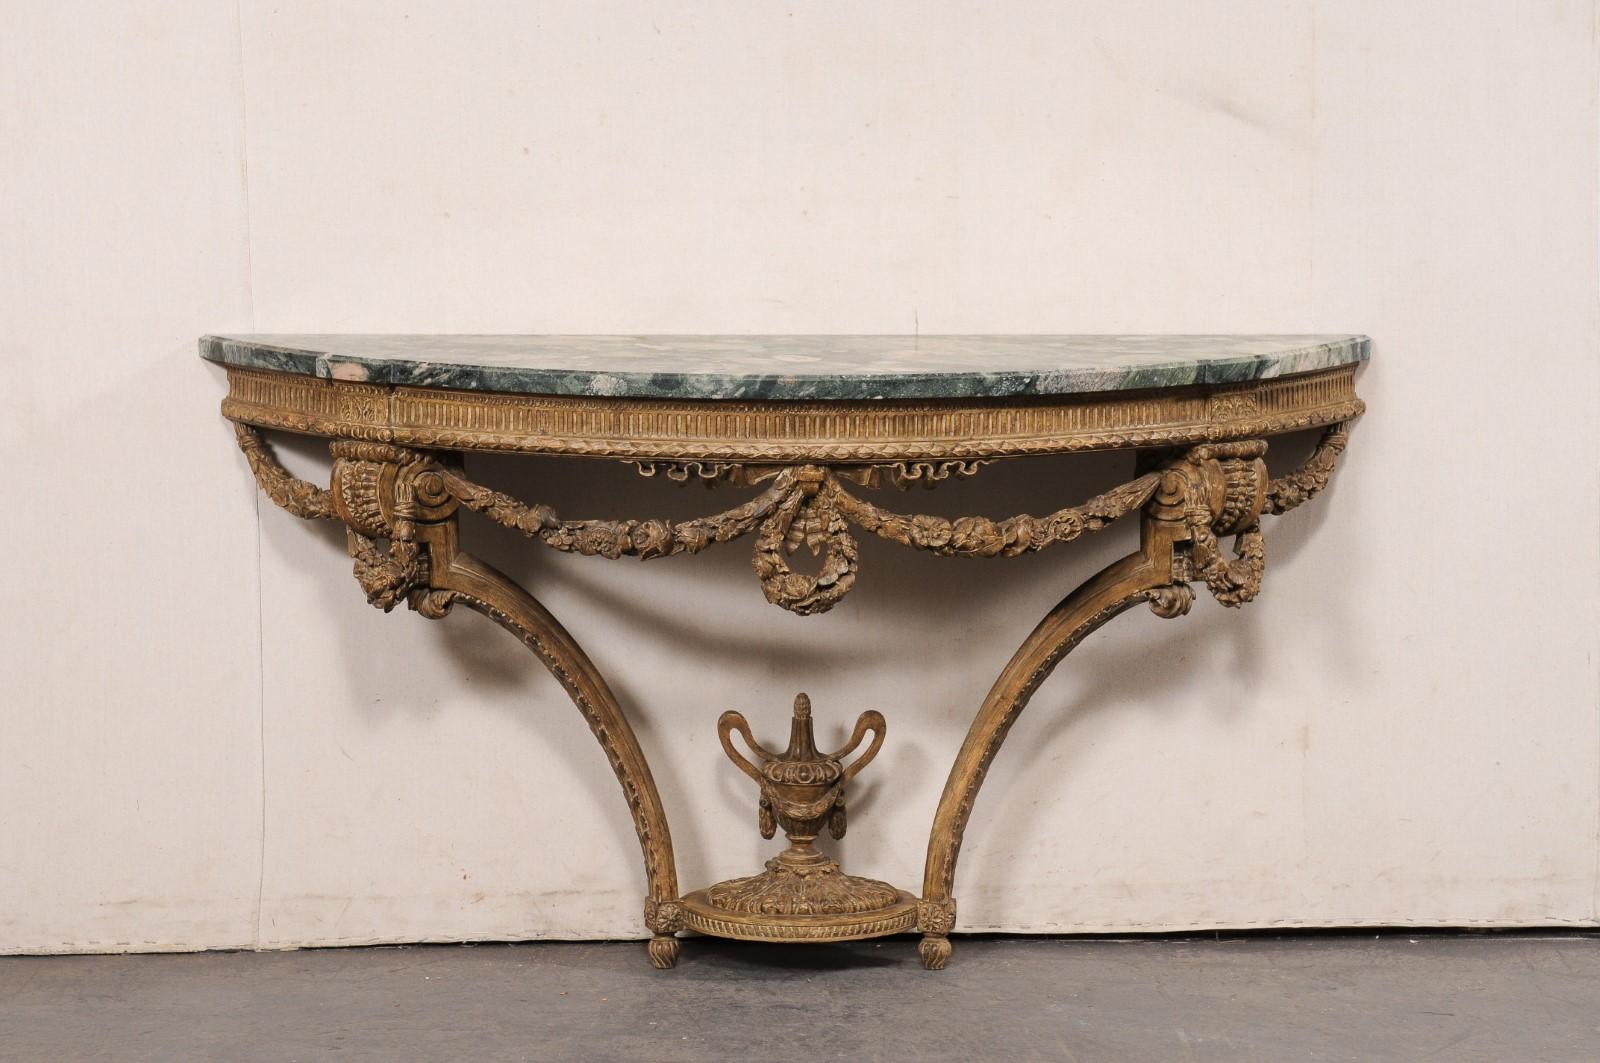 A French Neoclassical carved-wood console with marble top, from the 19th century. This antique table from France has an oblong demi-shaped (half-round) marble top with flattened backside, and a pair of shallow rectangular projections at either front